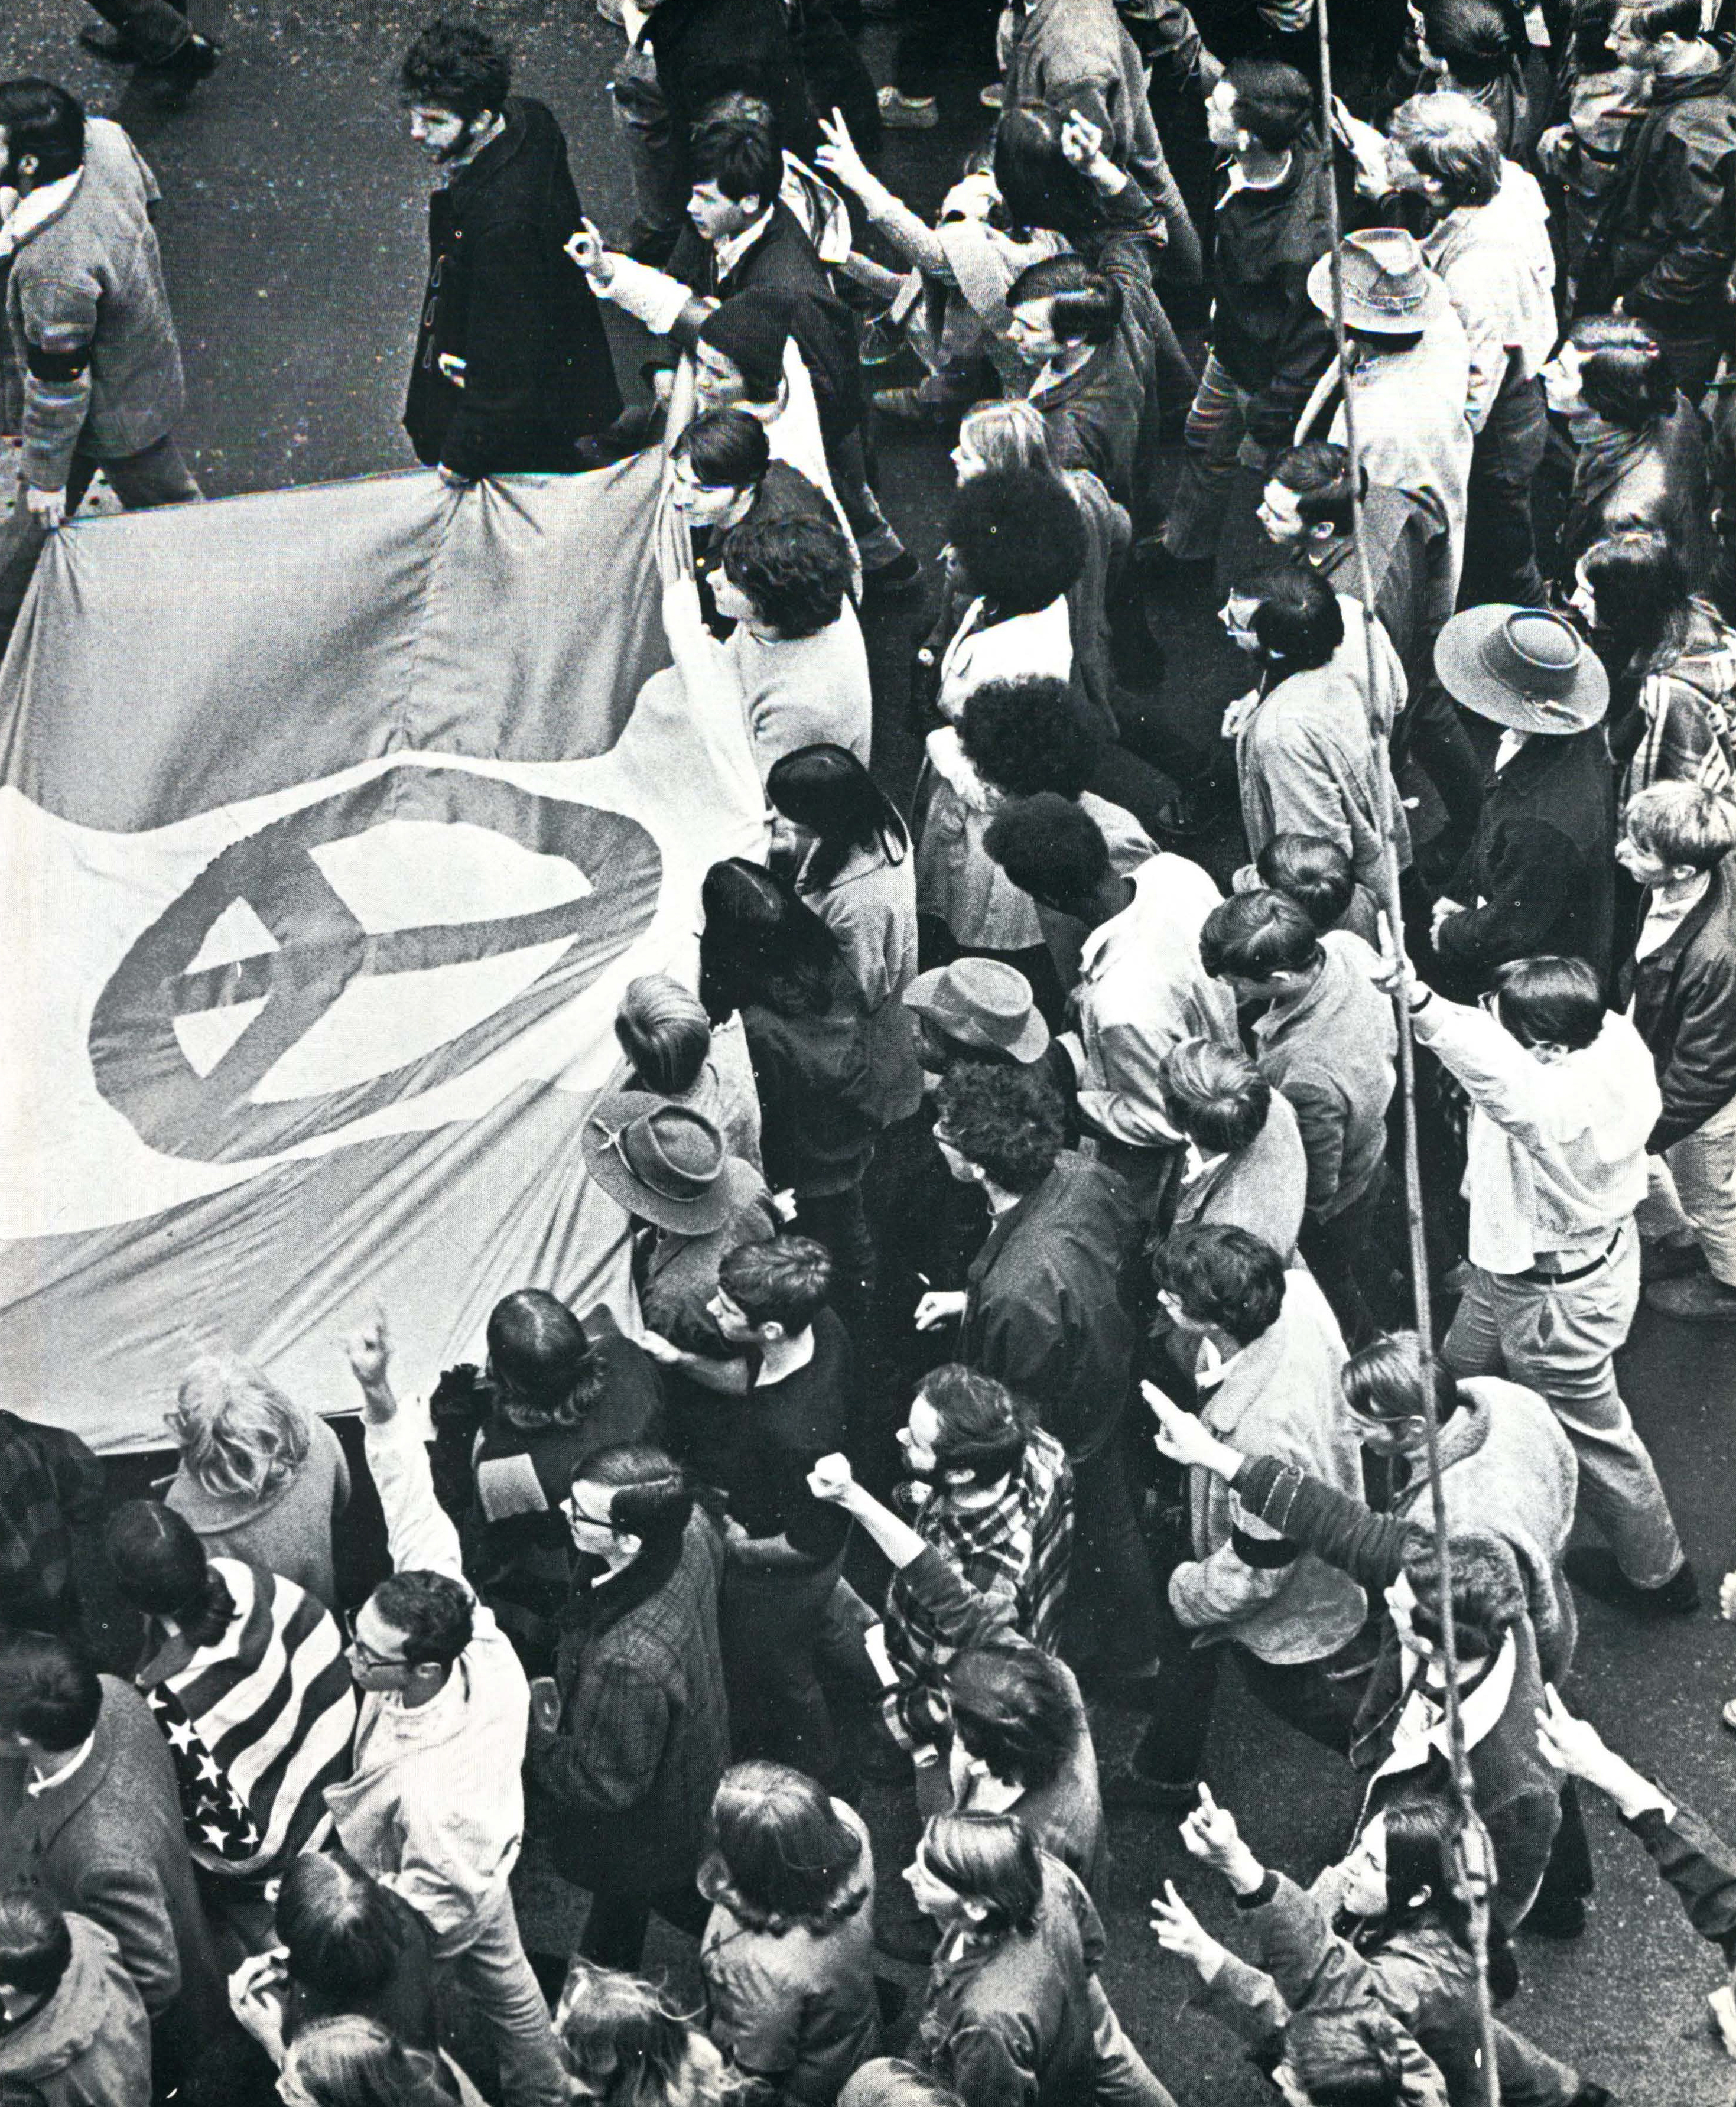 PSU students in 1970 marching on the SW Park Blocks